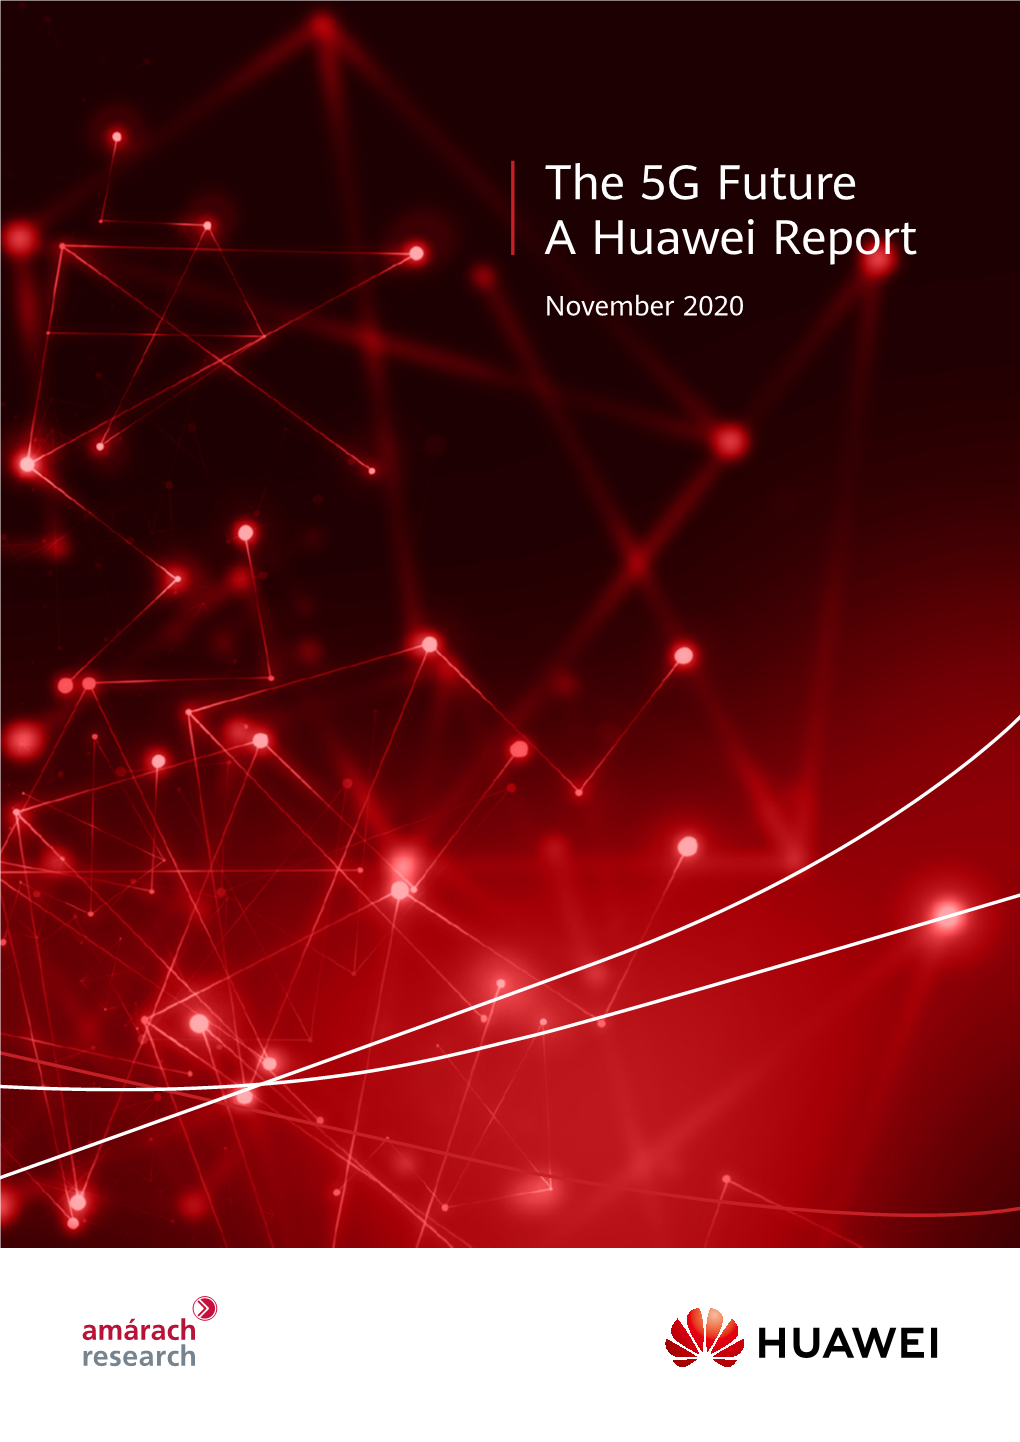 The 5G Future a Huawei Report